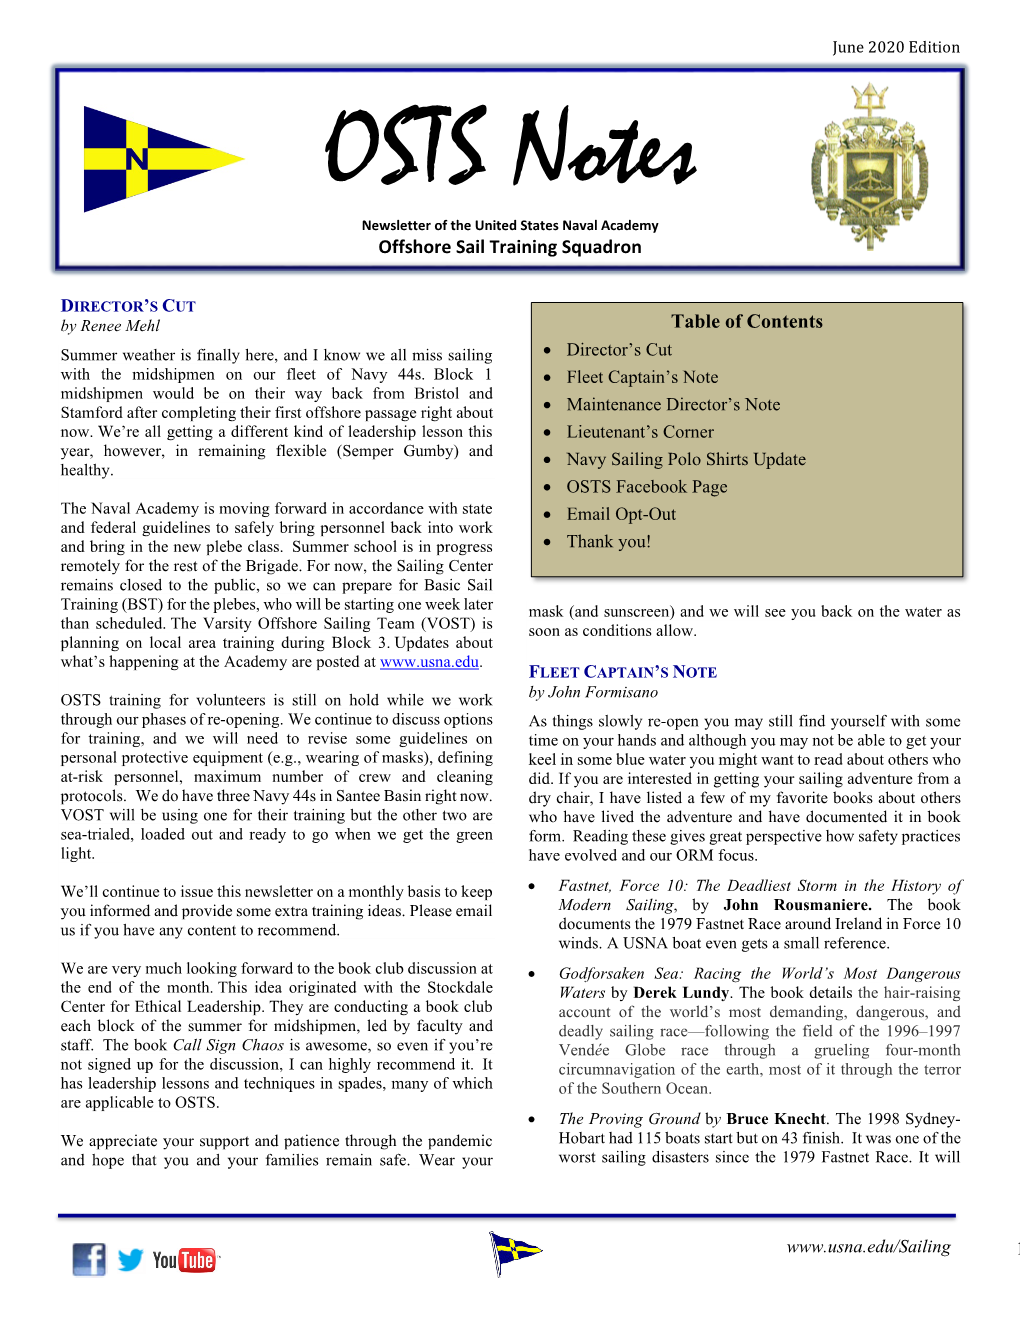 OSTS Notes Newsletter of the United States Naval Academy Offshore Sail Training Squadron